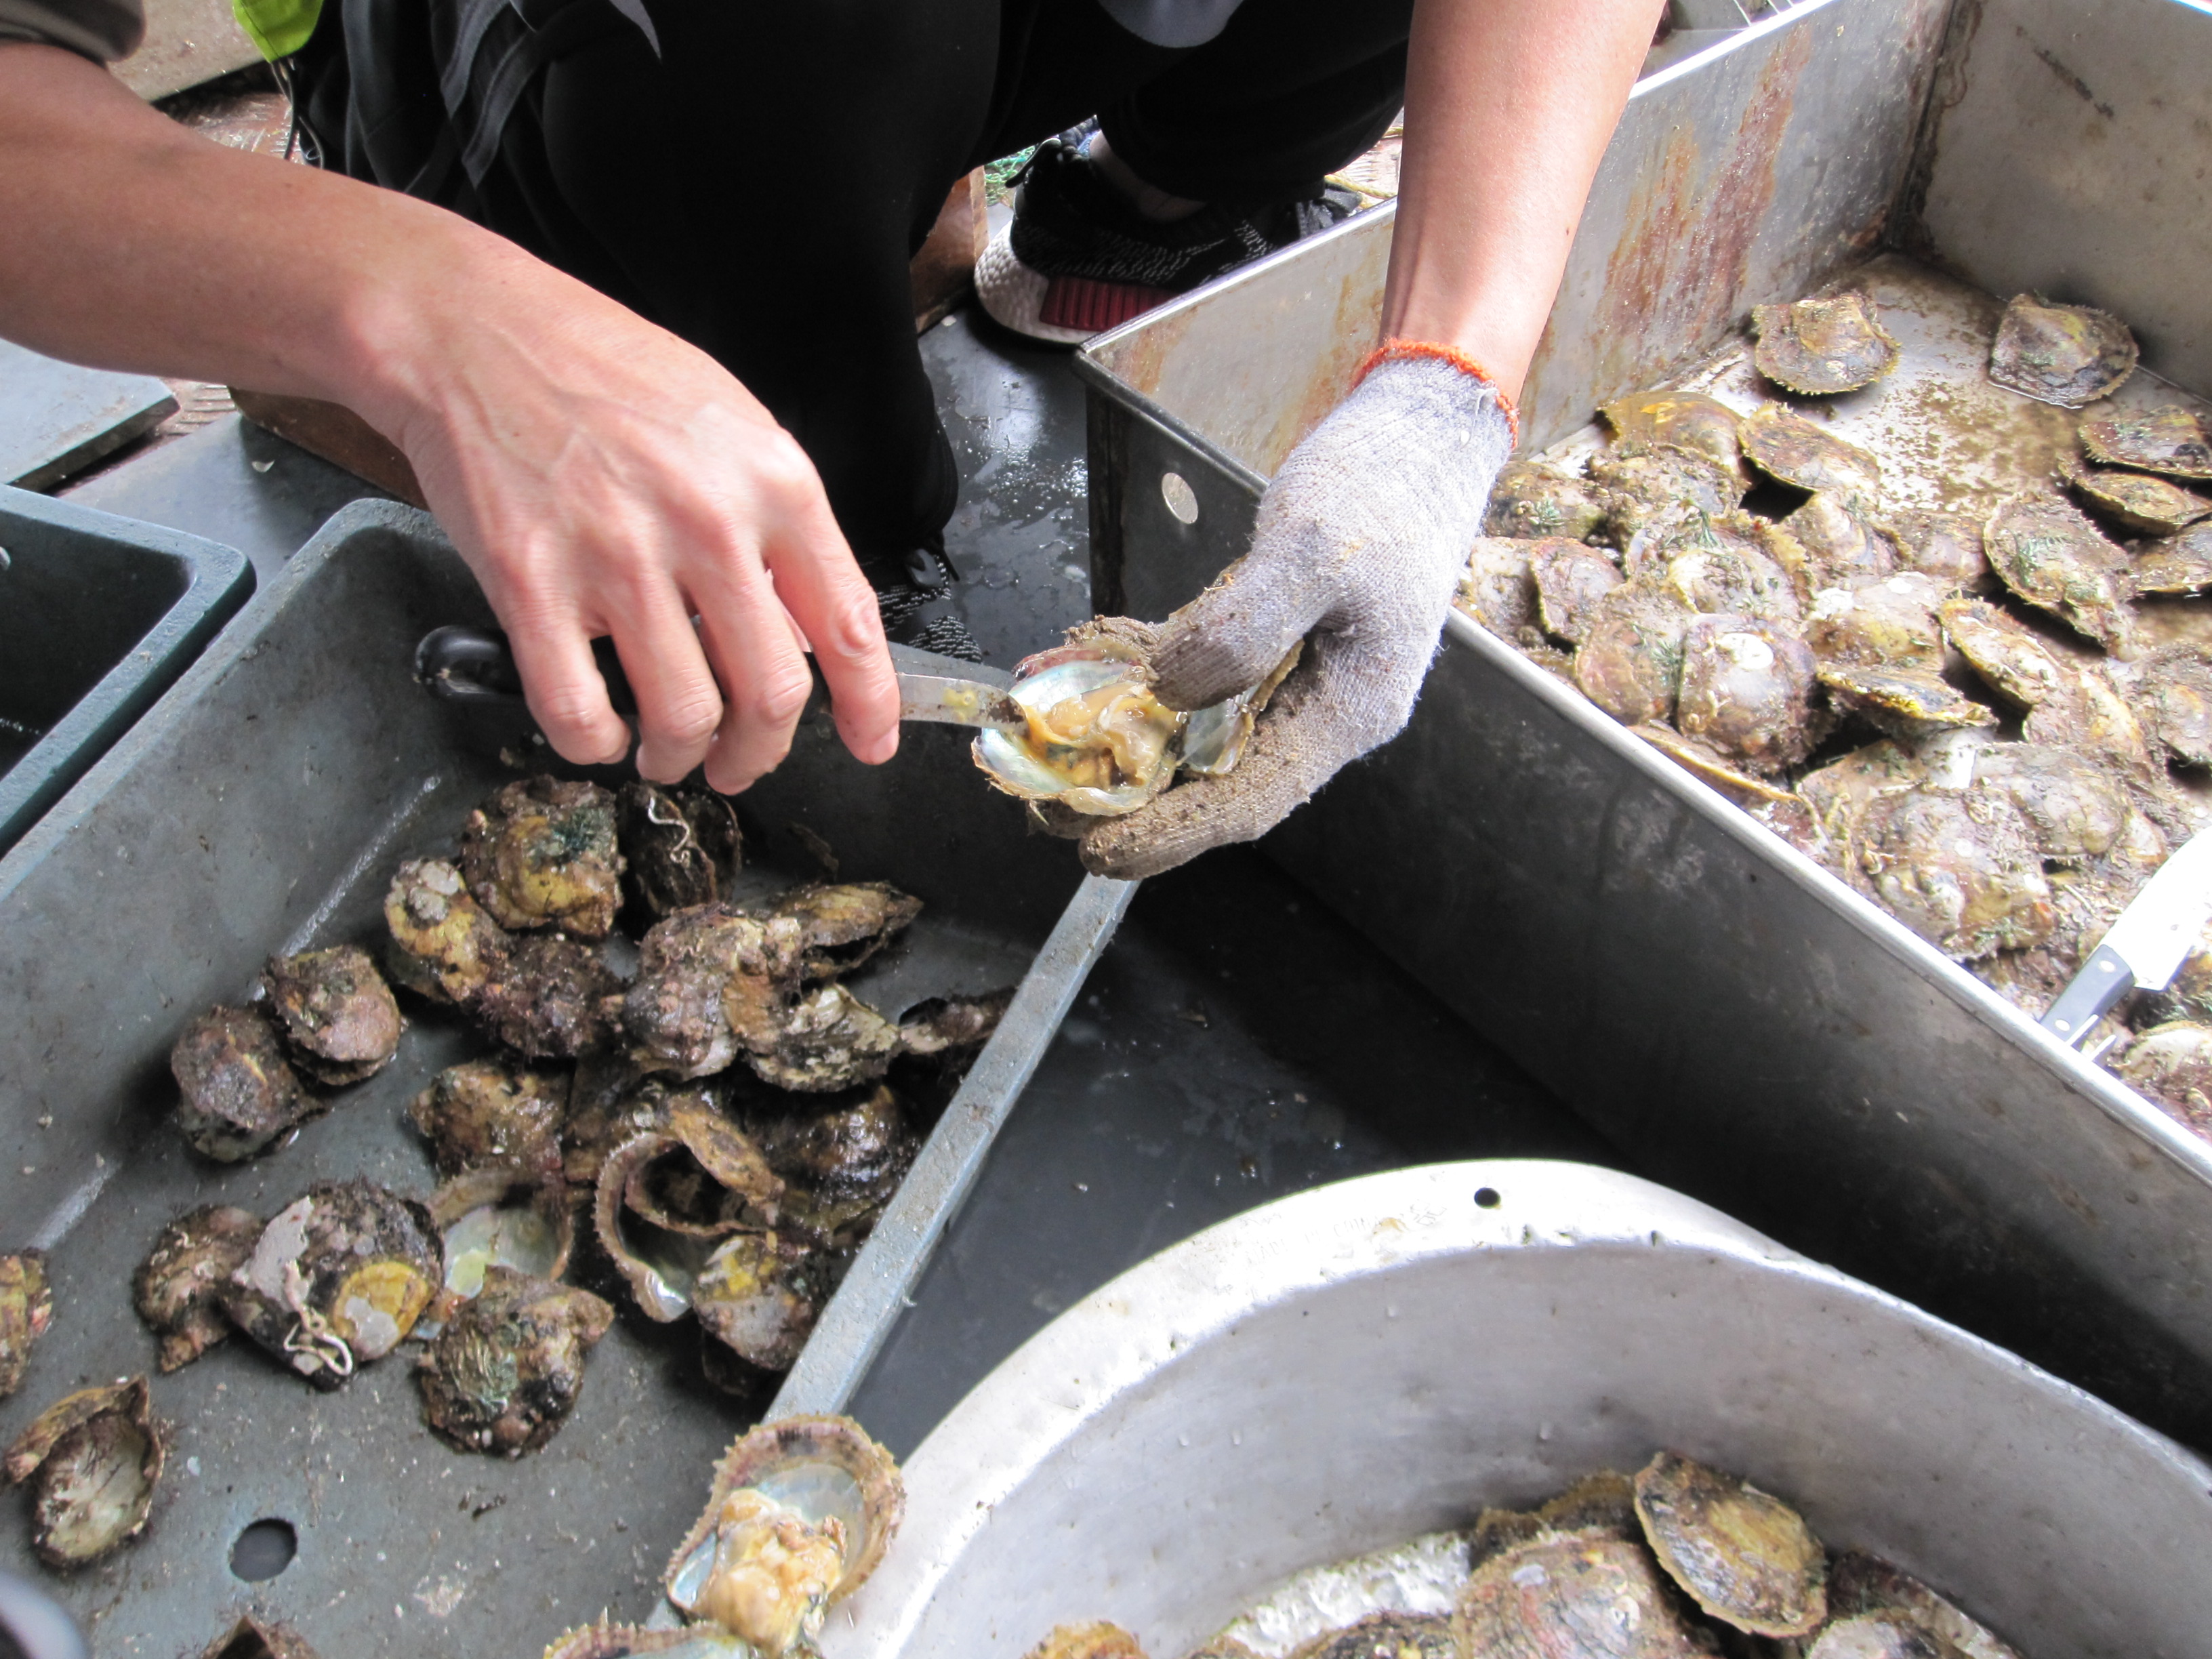 Workers perform regular cleaning of pearl oysters, as well as monitoring of the survival rate of pearl oysters and the nucleus retention rate.